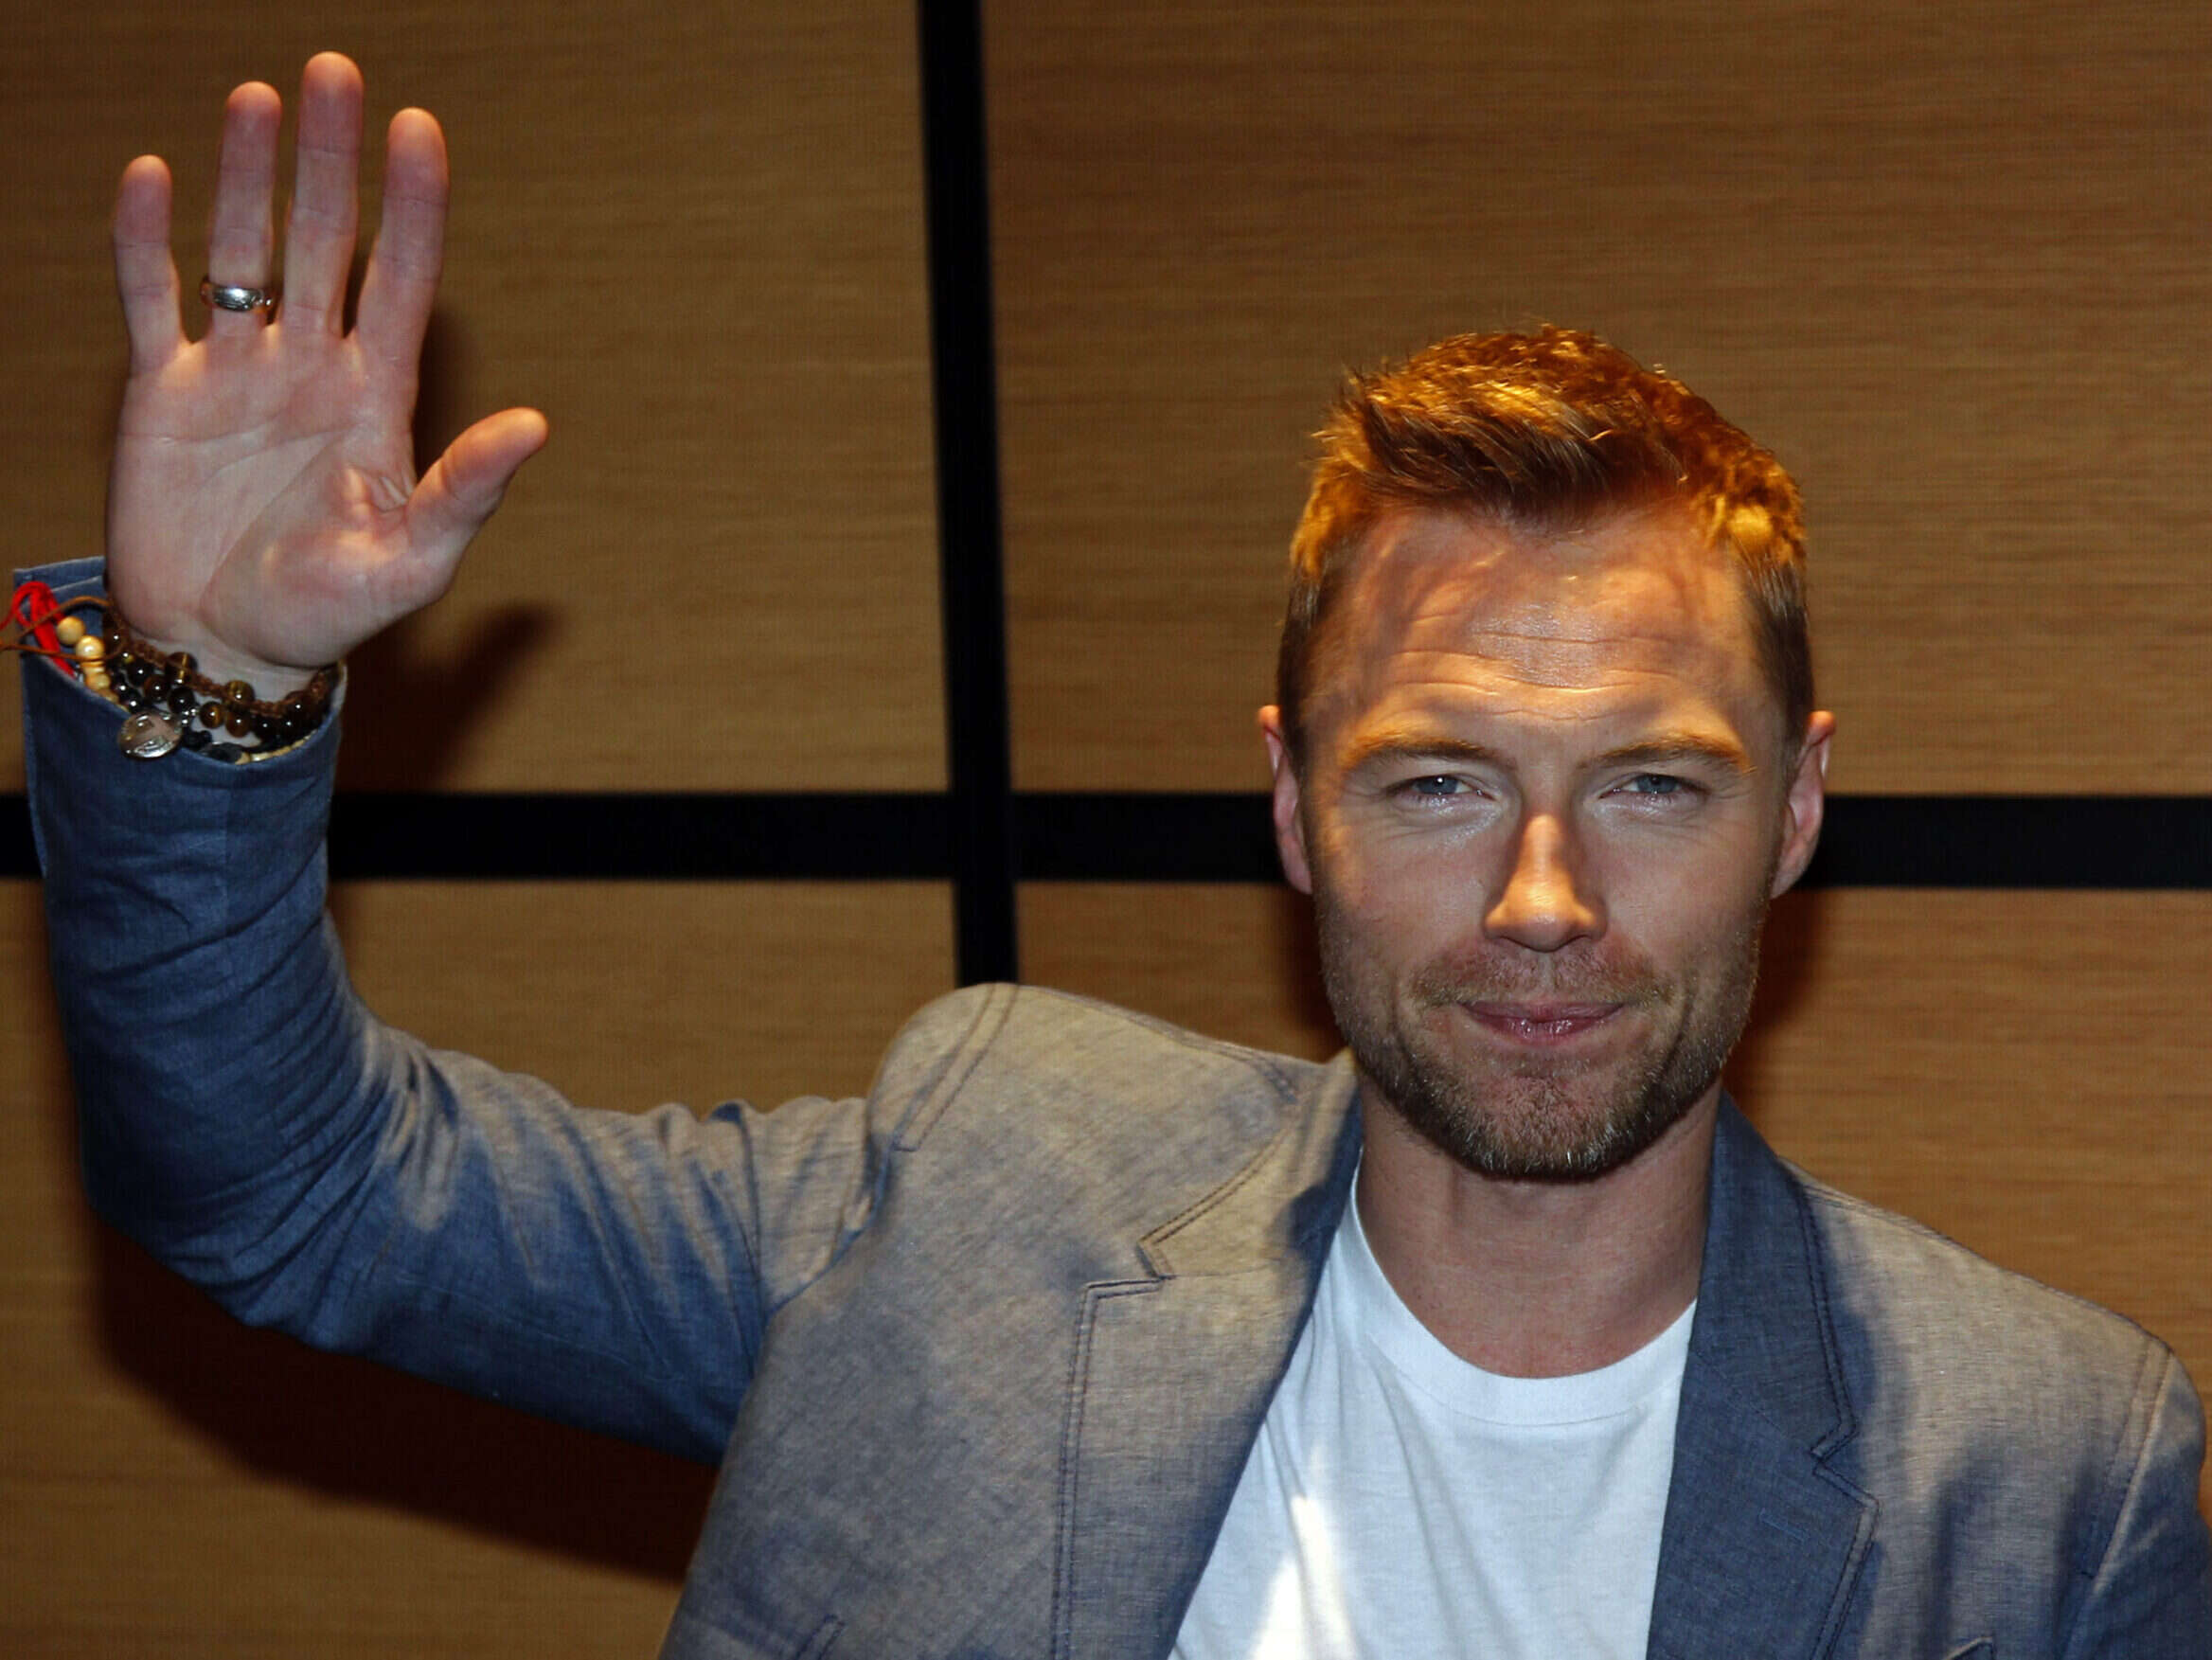 Ronan Keating wins News of the World phone-hacking payout over 15 years of 'suspicious' stories